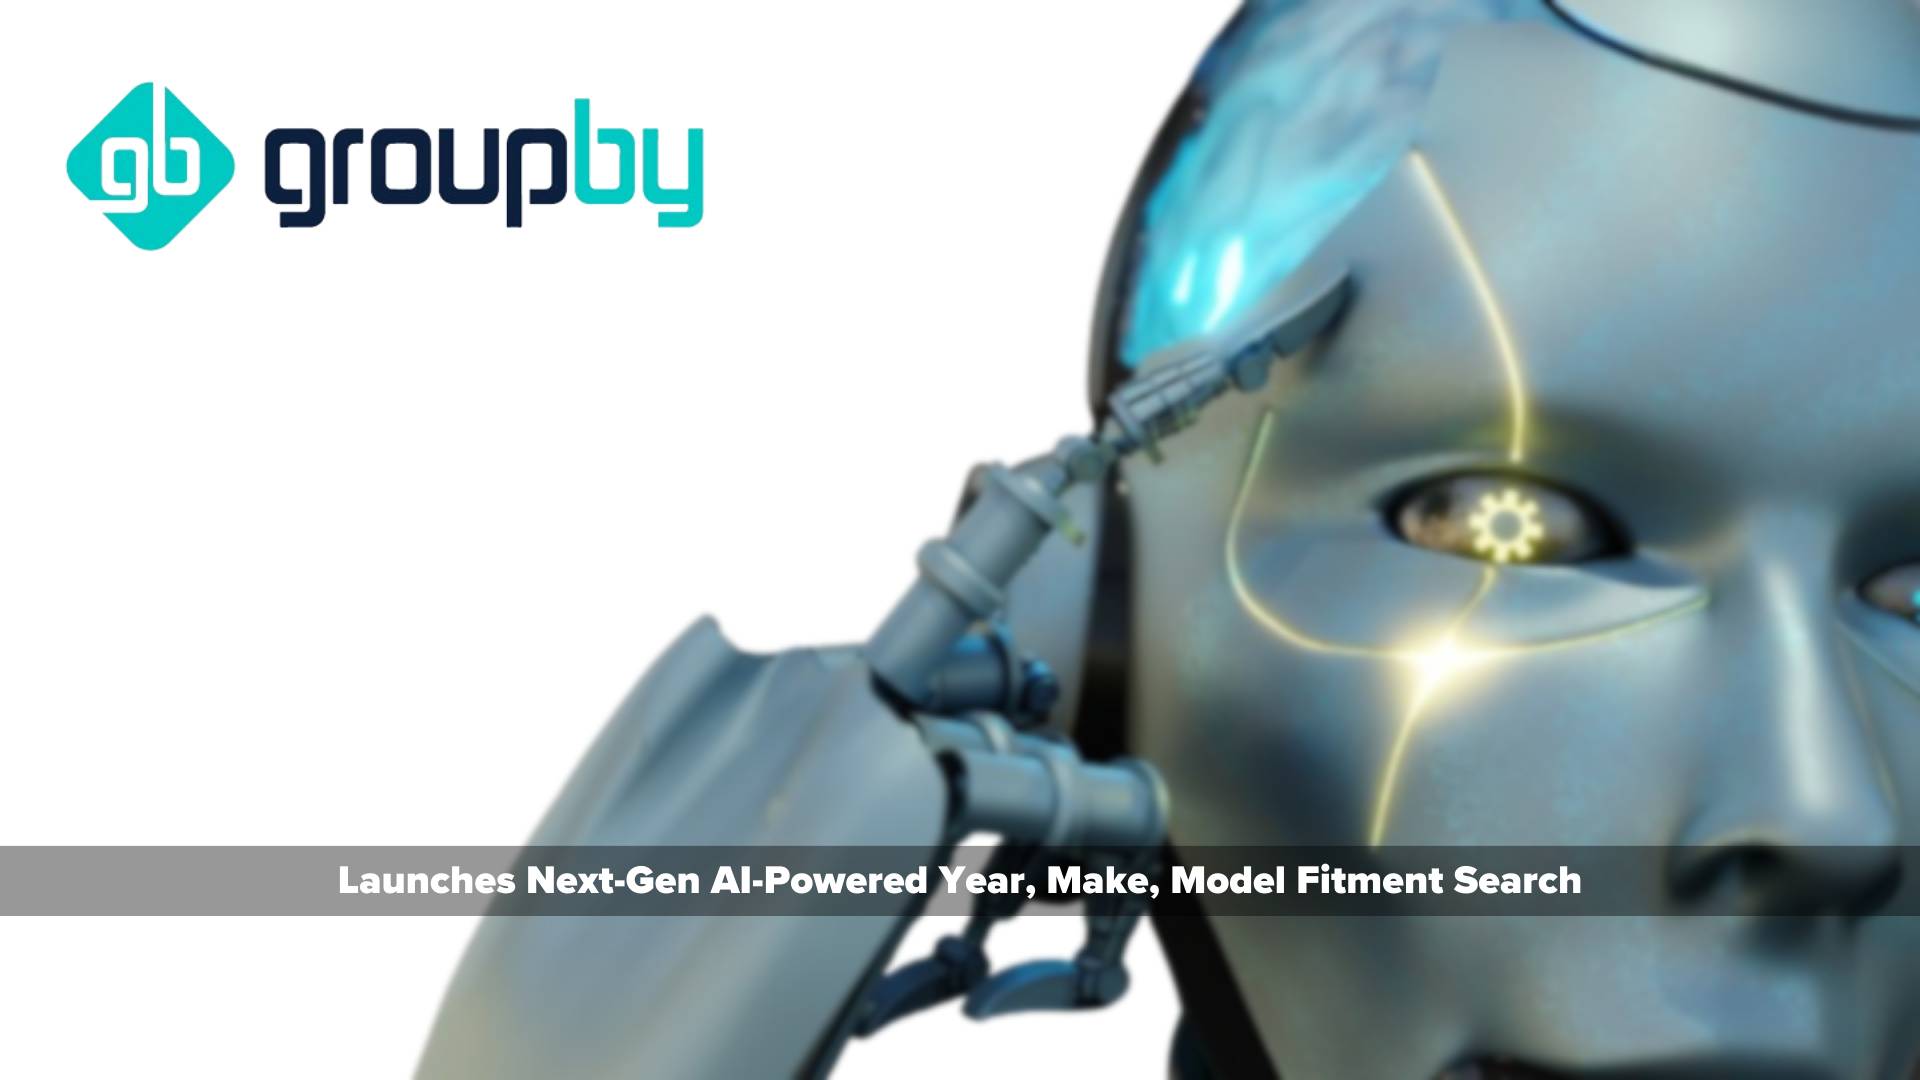 GroupBy Launches Next-Gen AI-Powered Year, Make, Model Fitment Search